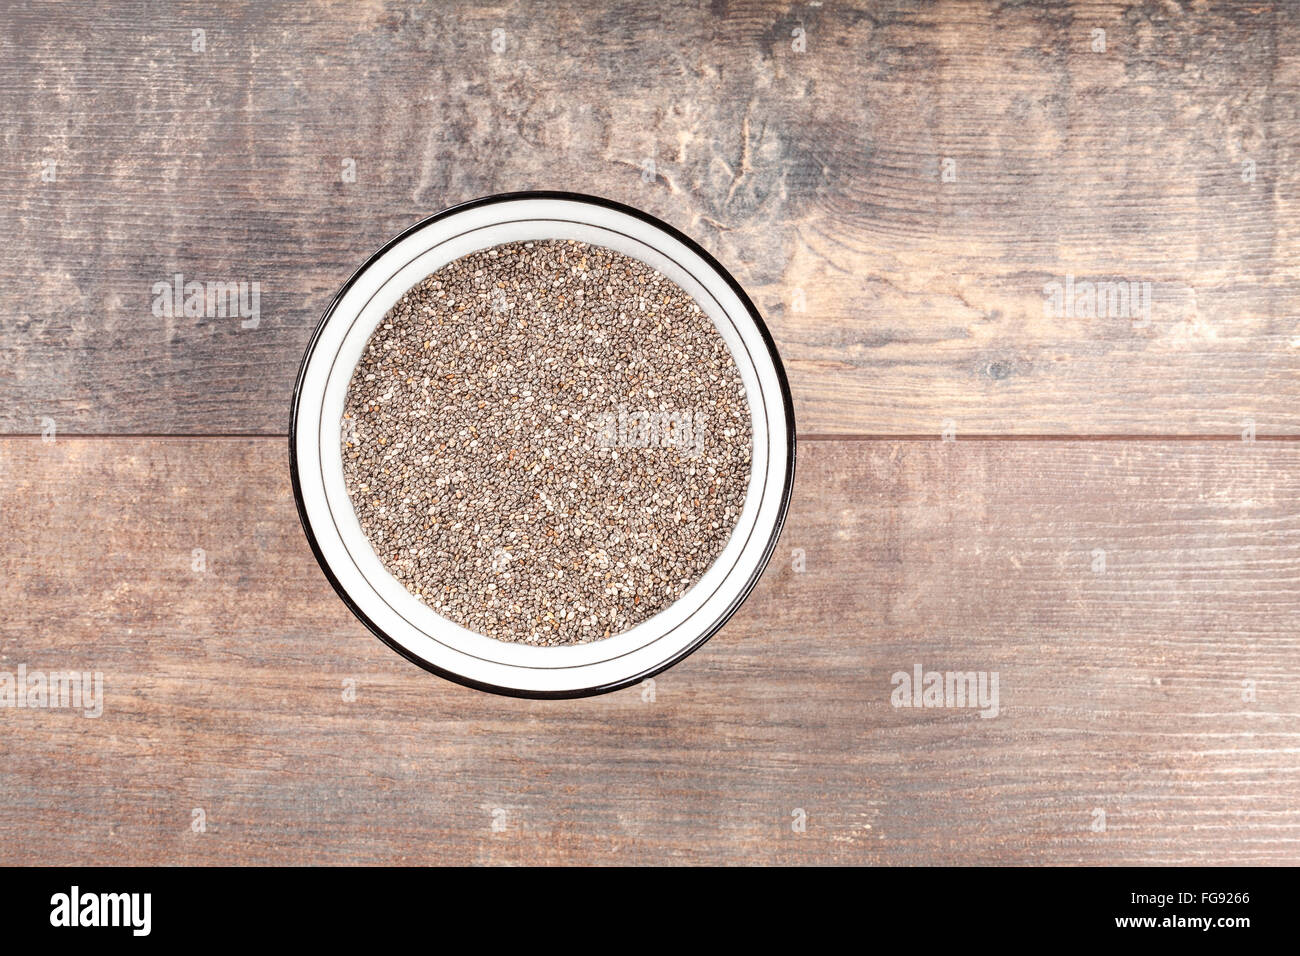 Chia seeds in a bowl on wooden background. Stock Photo